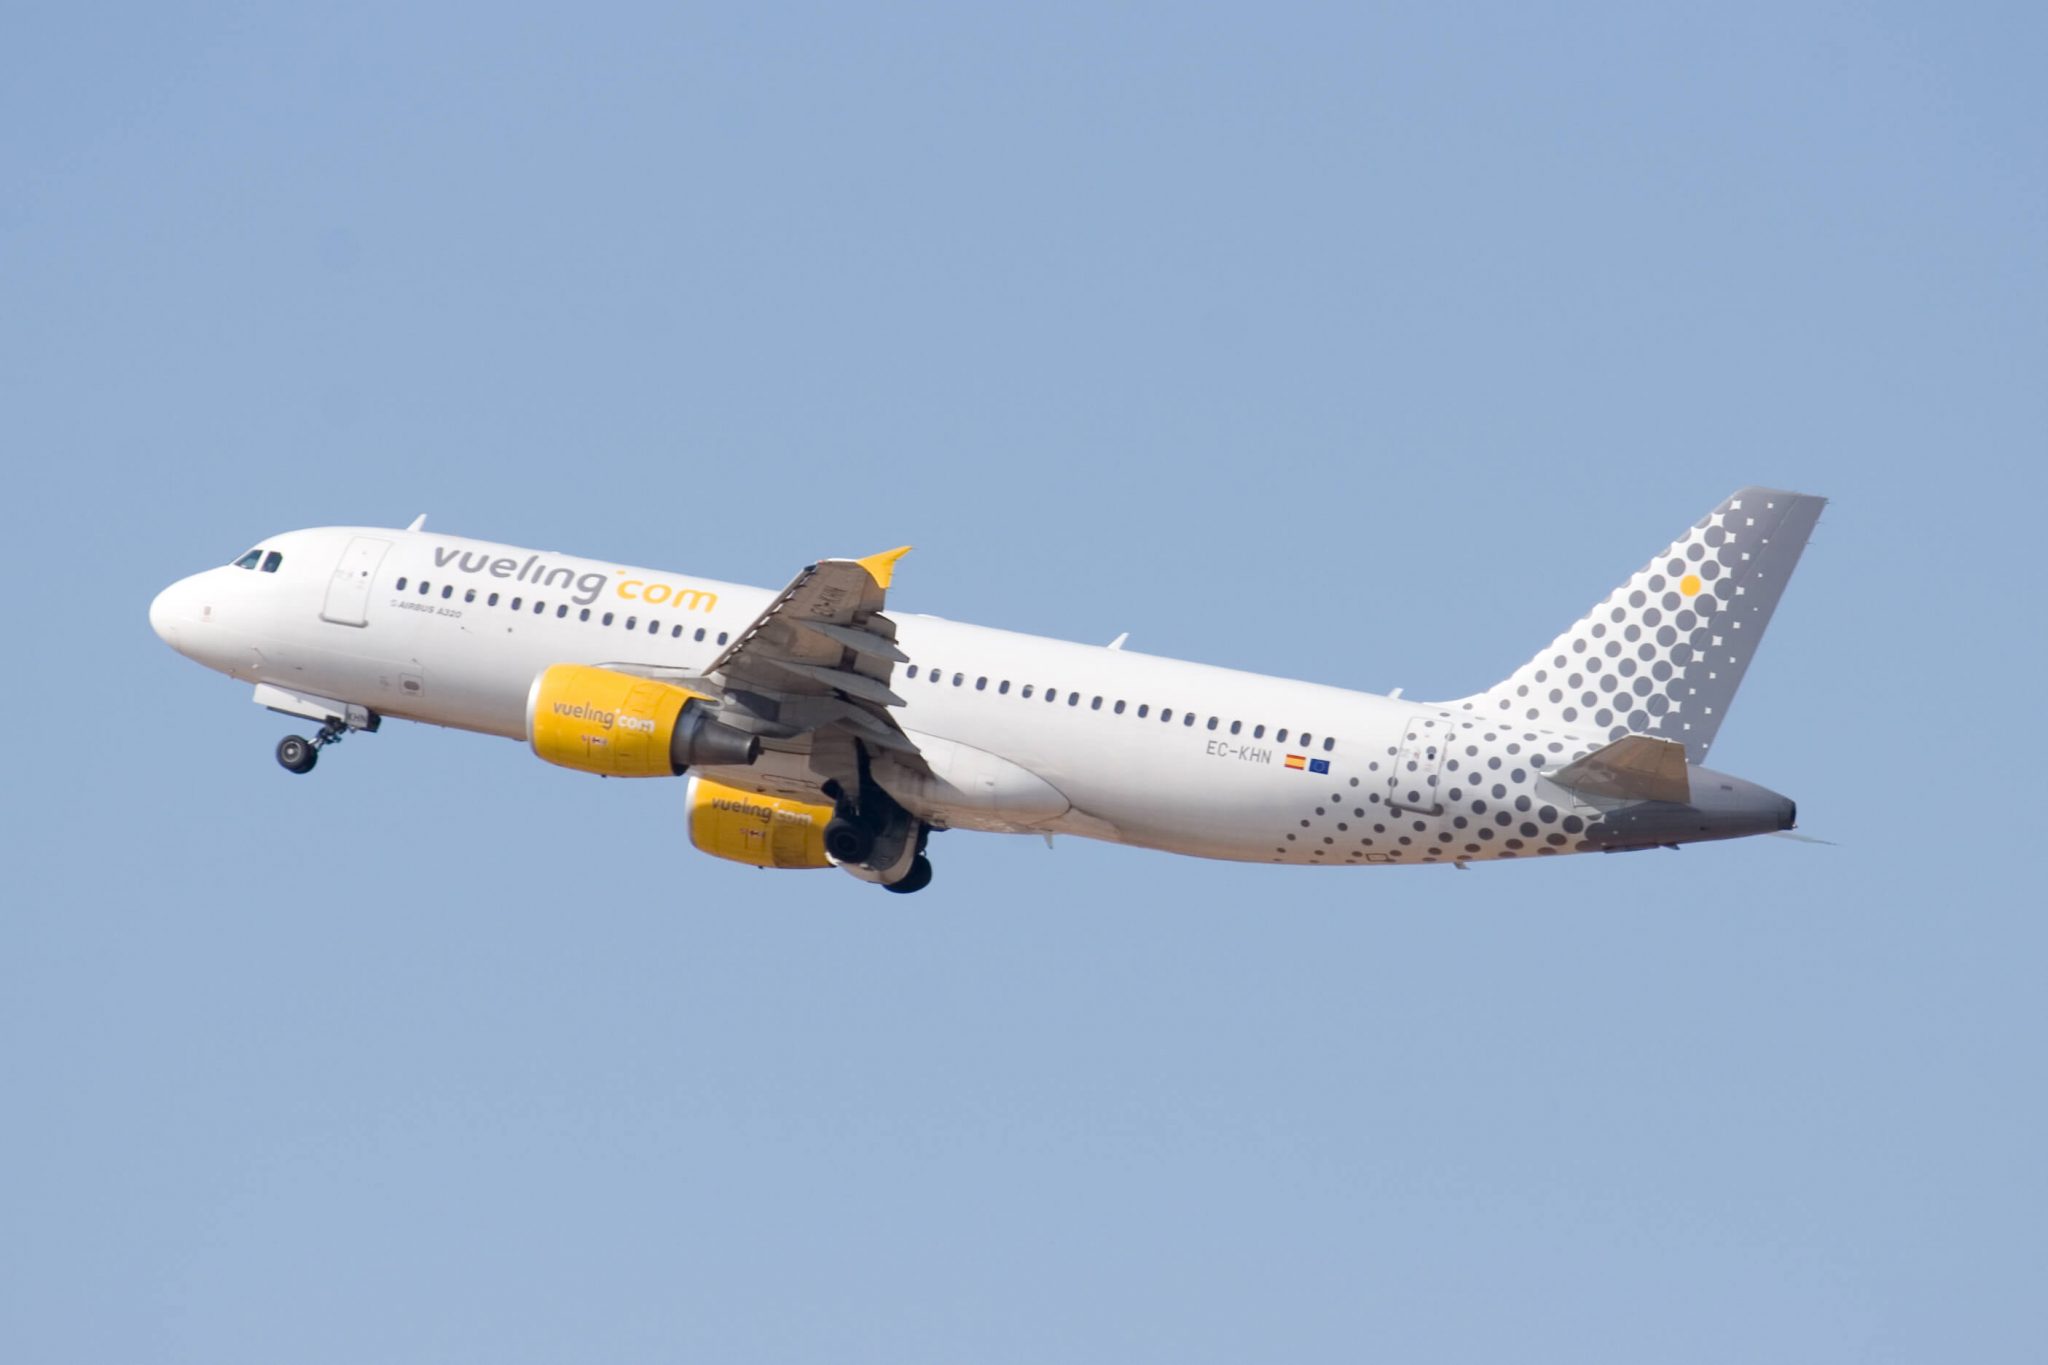 Vueling launches new flights from Birmingham Airport, UK